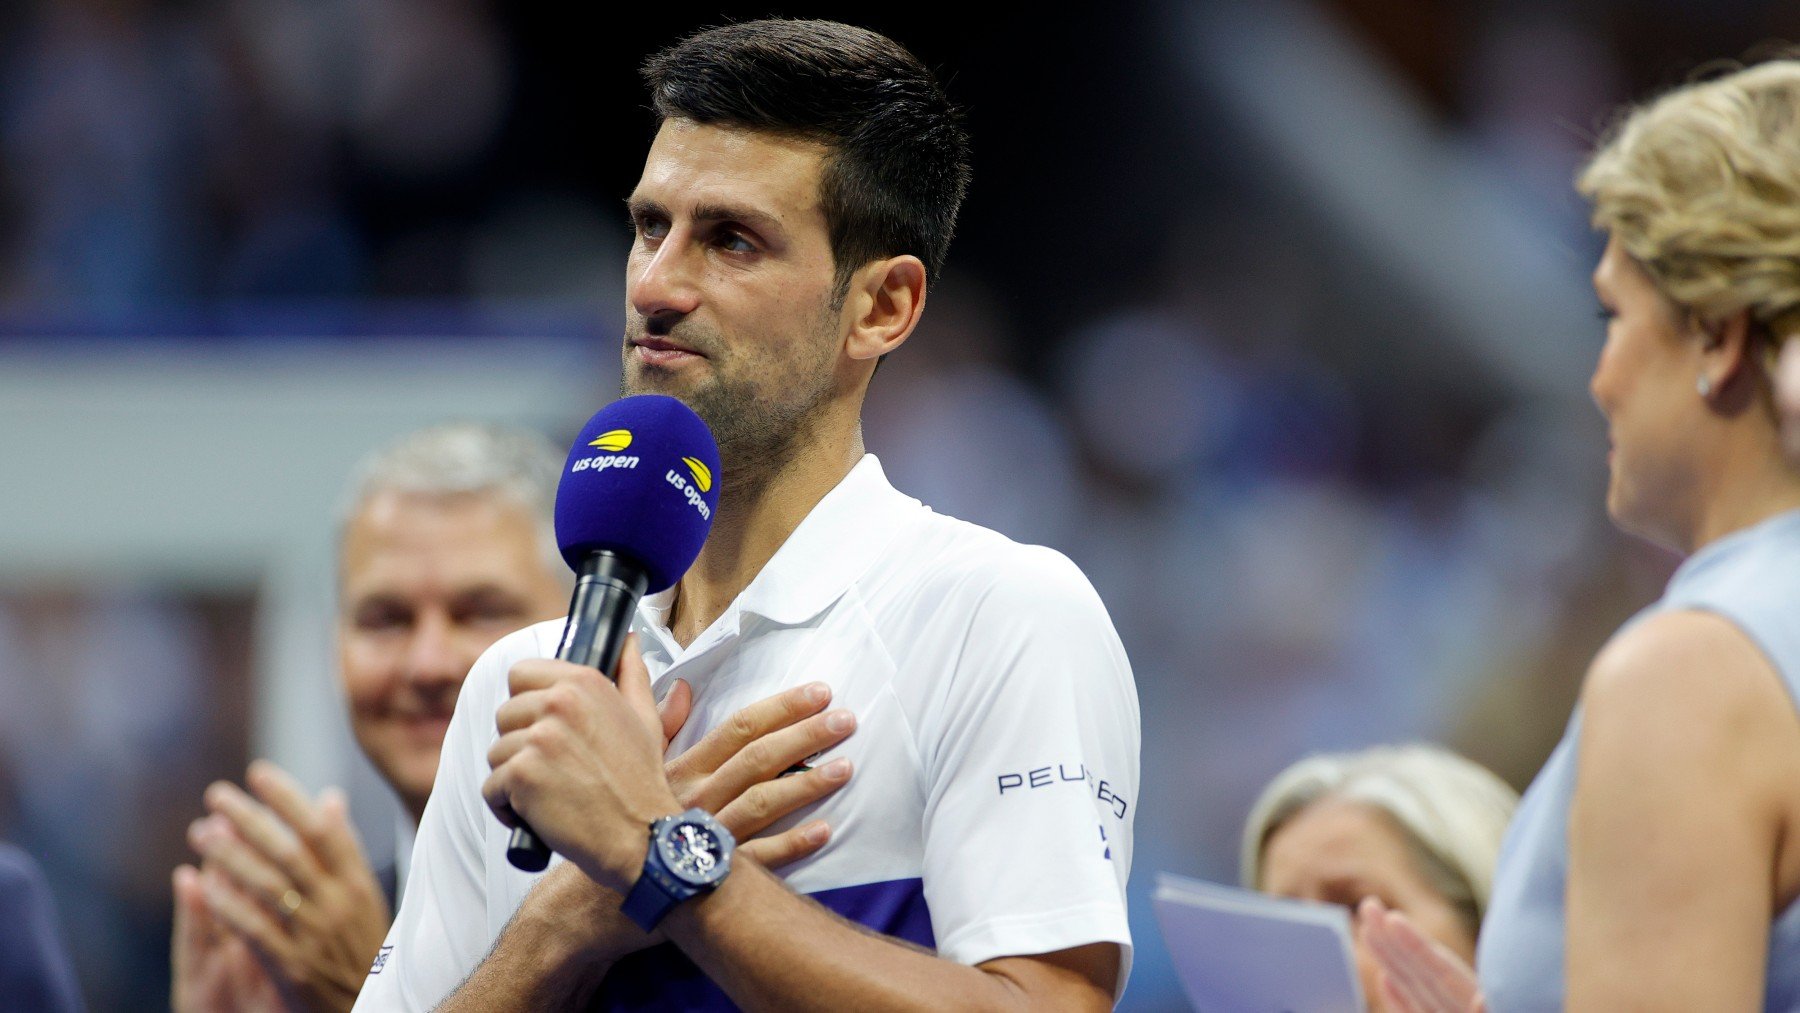 The United States opens the way for Novak Djokovic to play the US Open